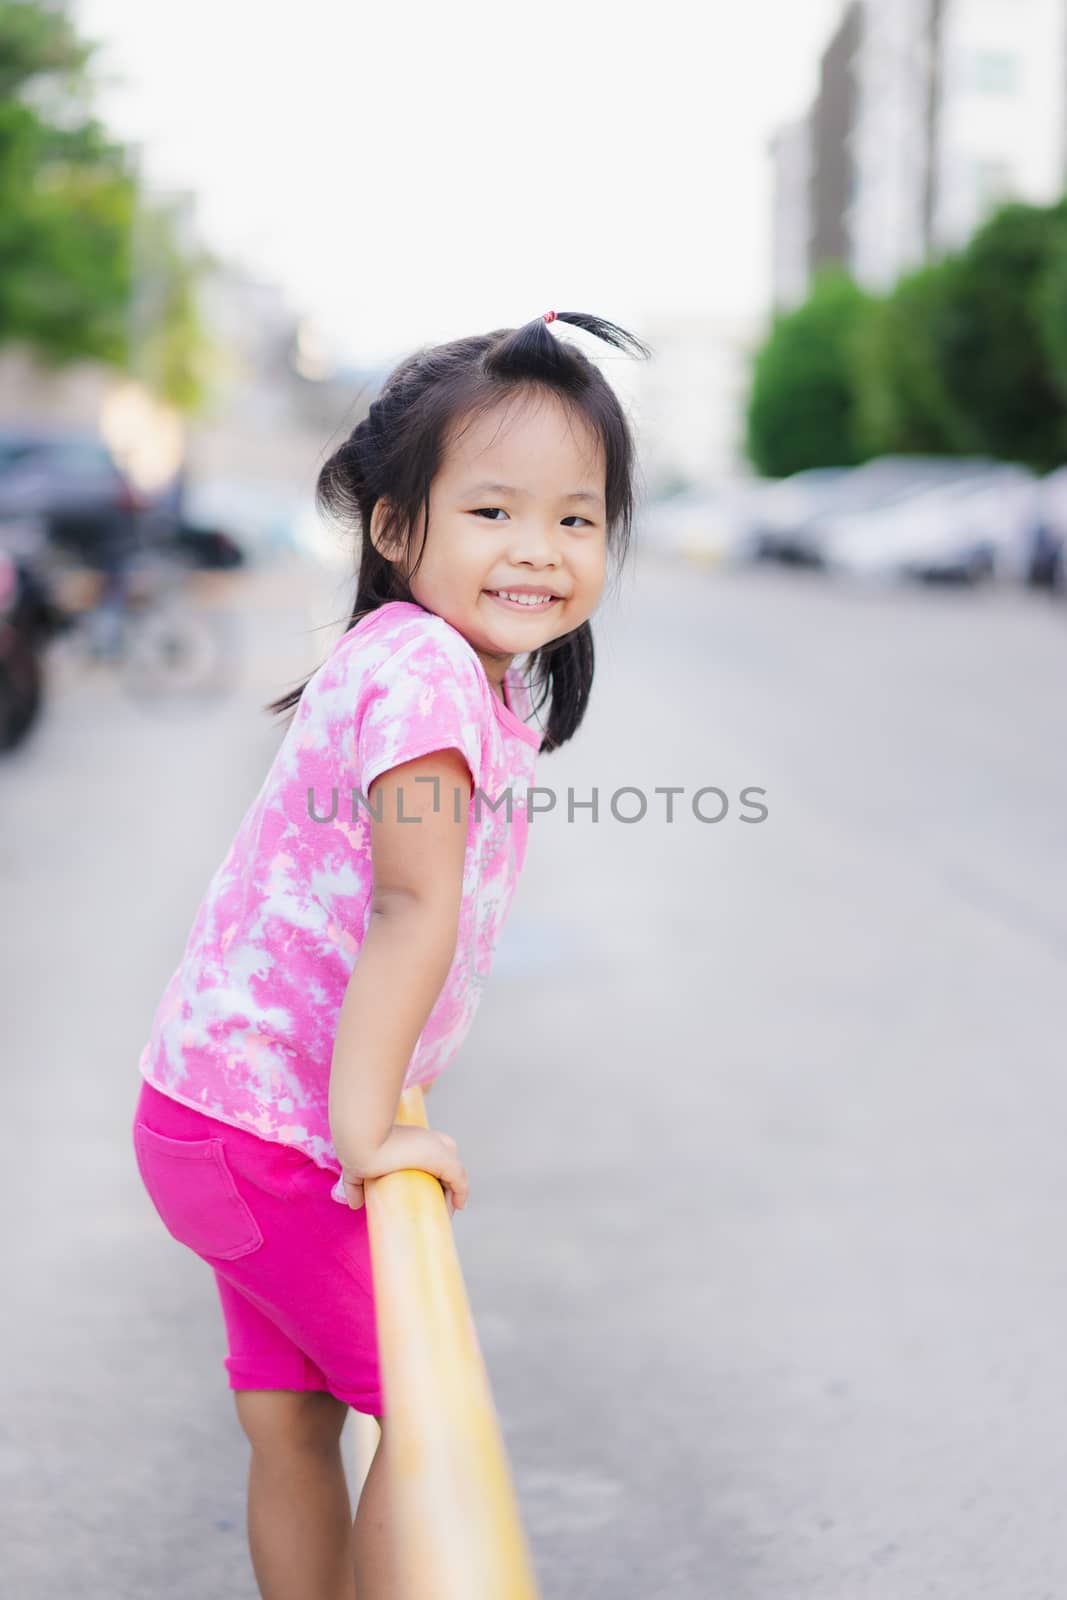 Little girl climbing yellow fence in the park by domonite